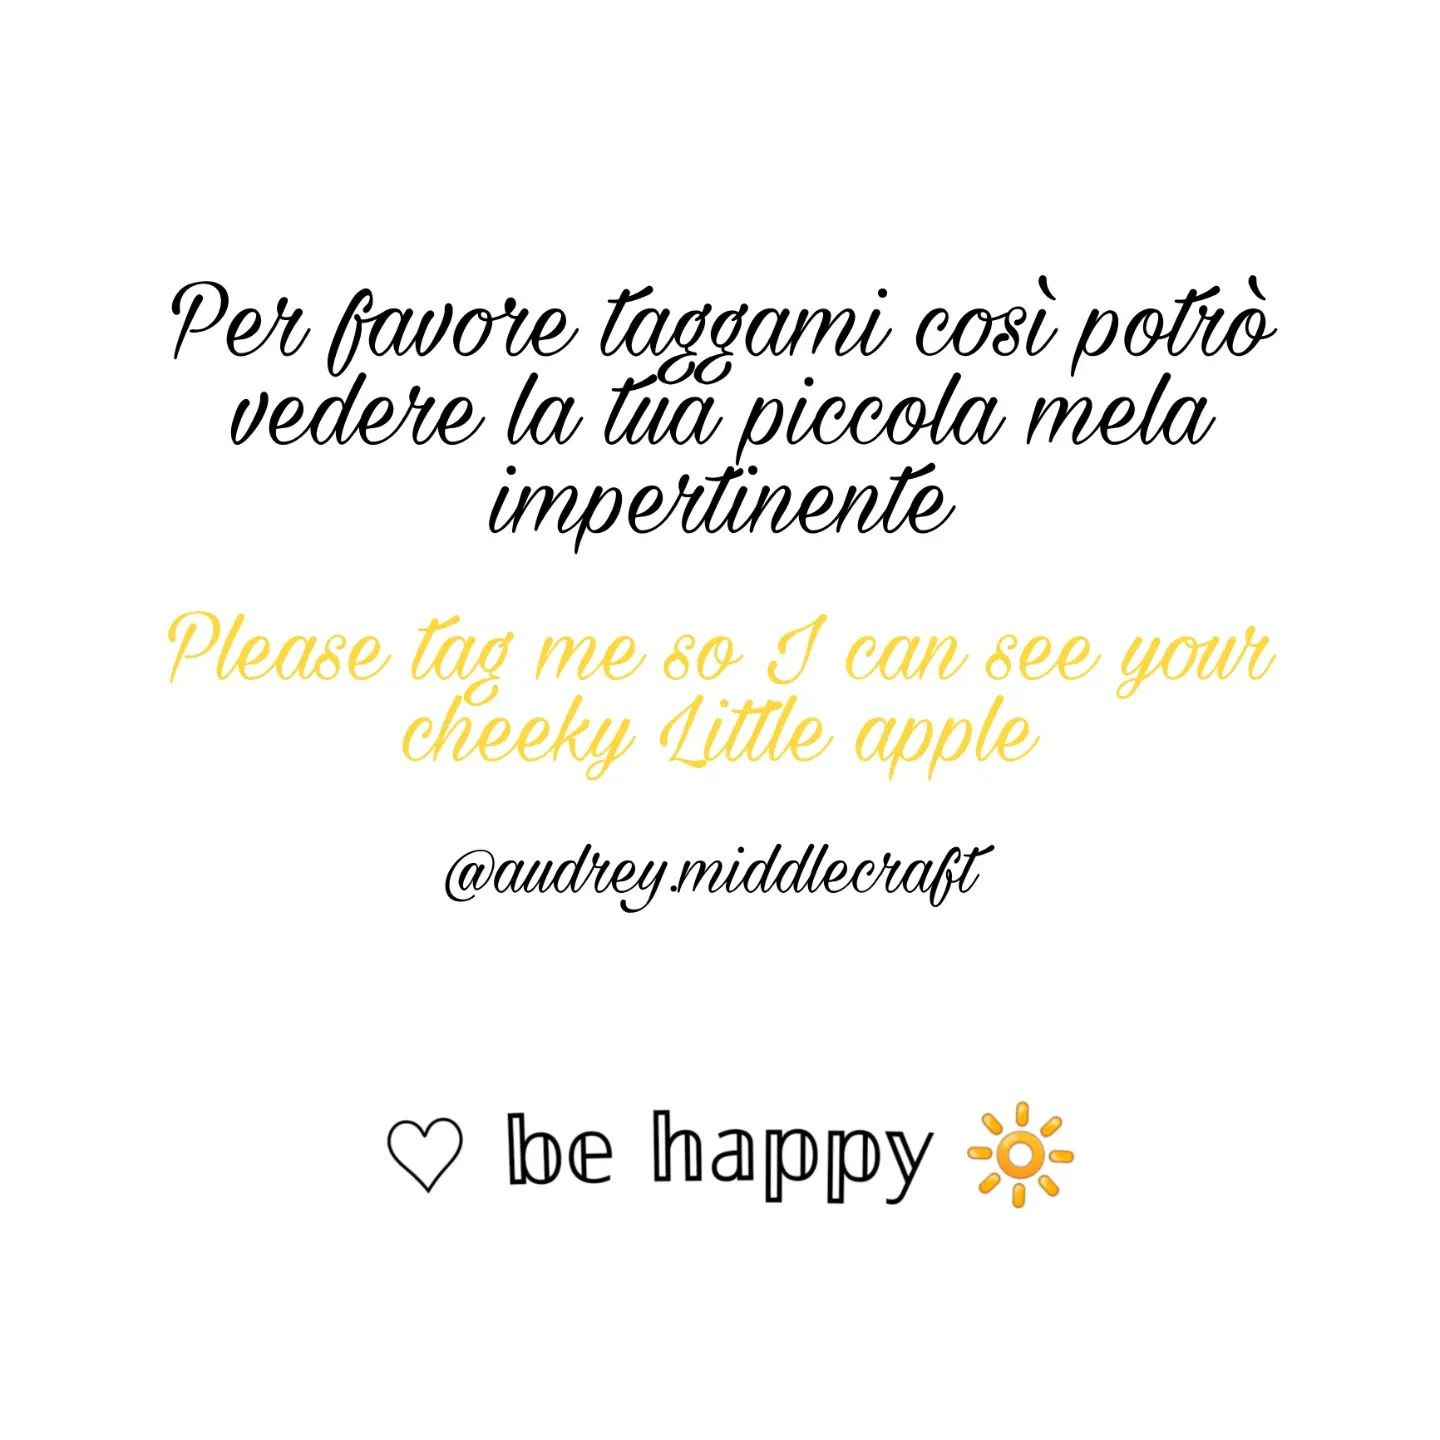 🍏 In Italy we say that "an apple a day keeps the doctor away" 😄. 🌈